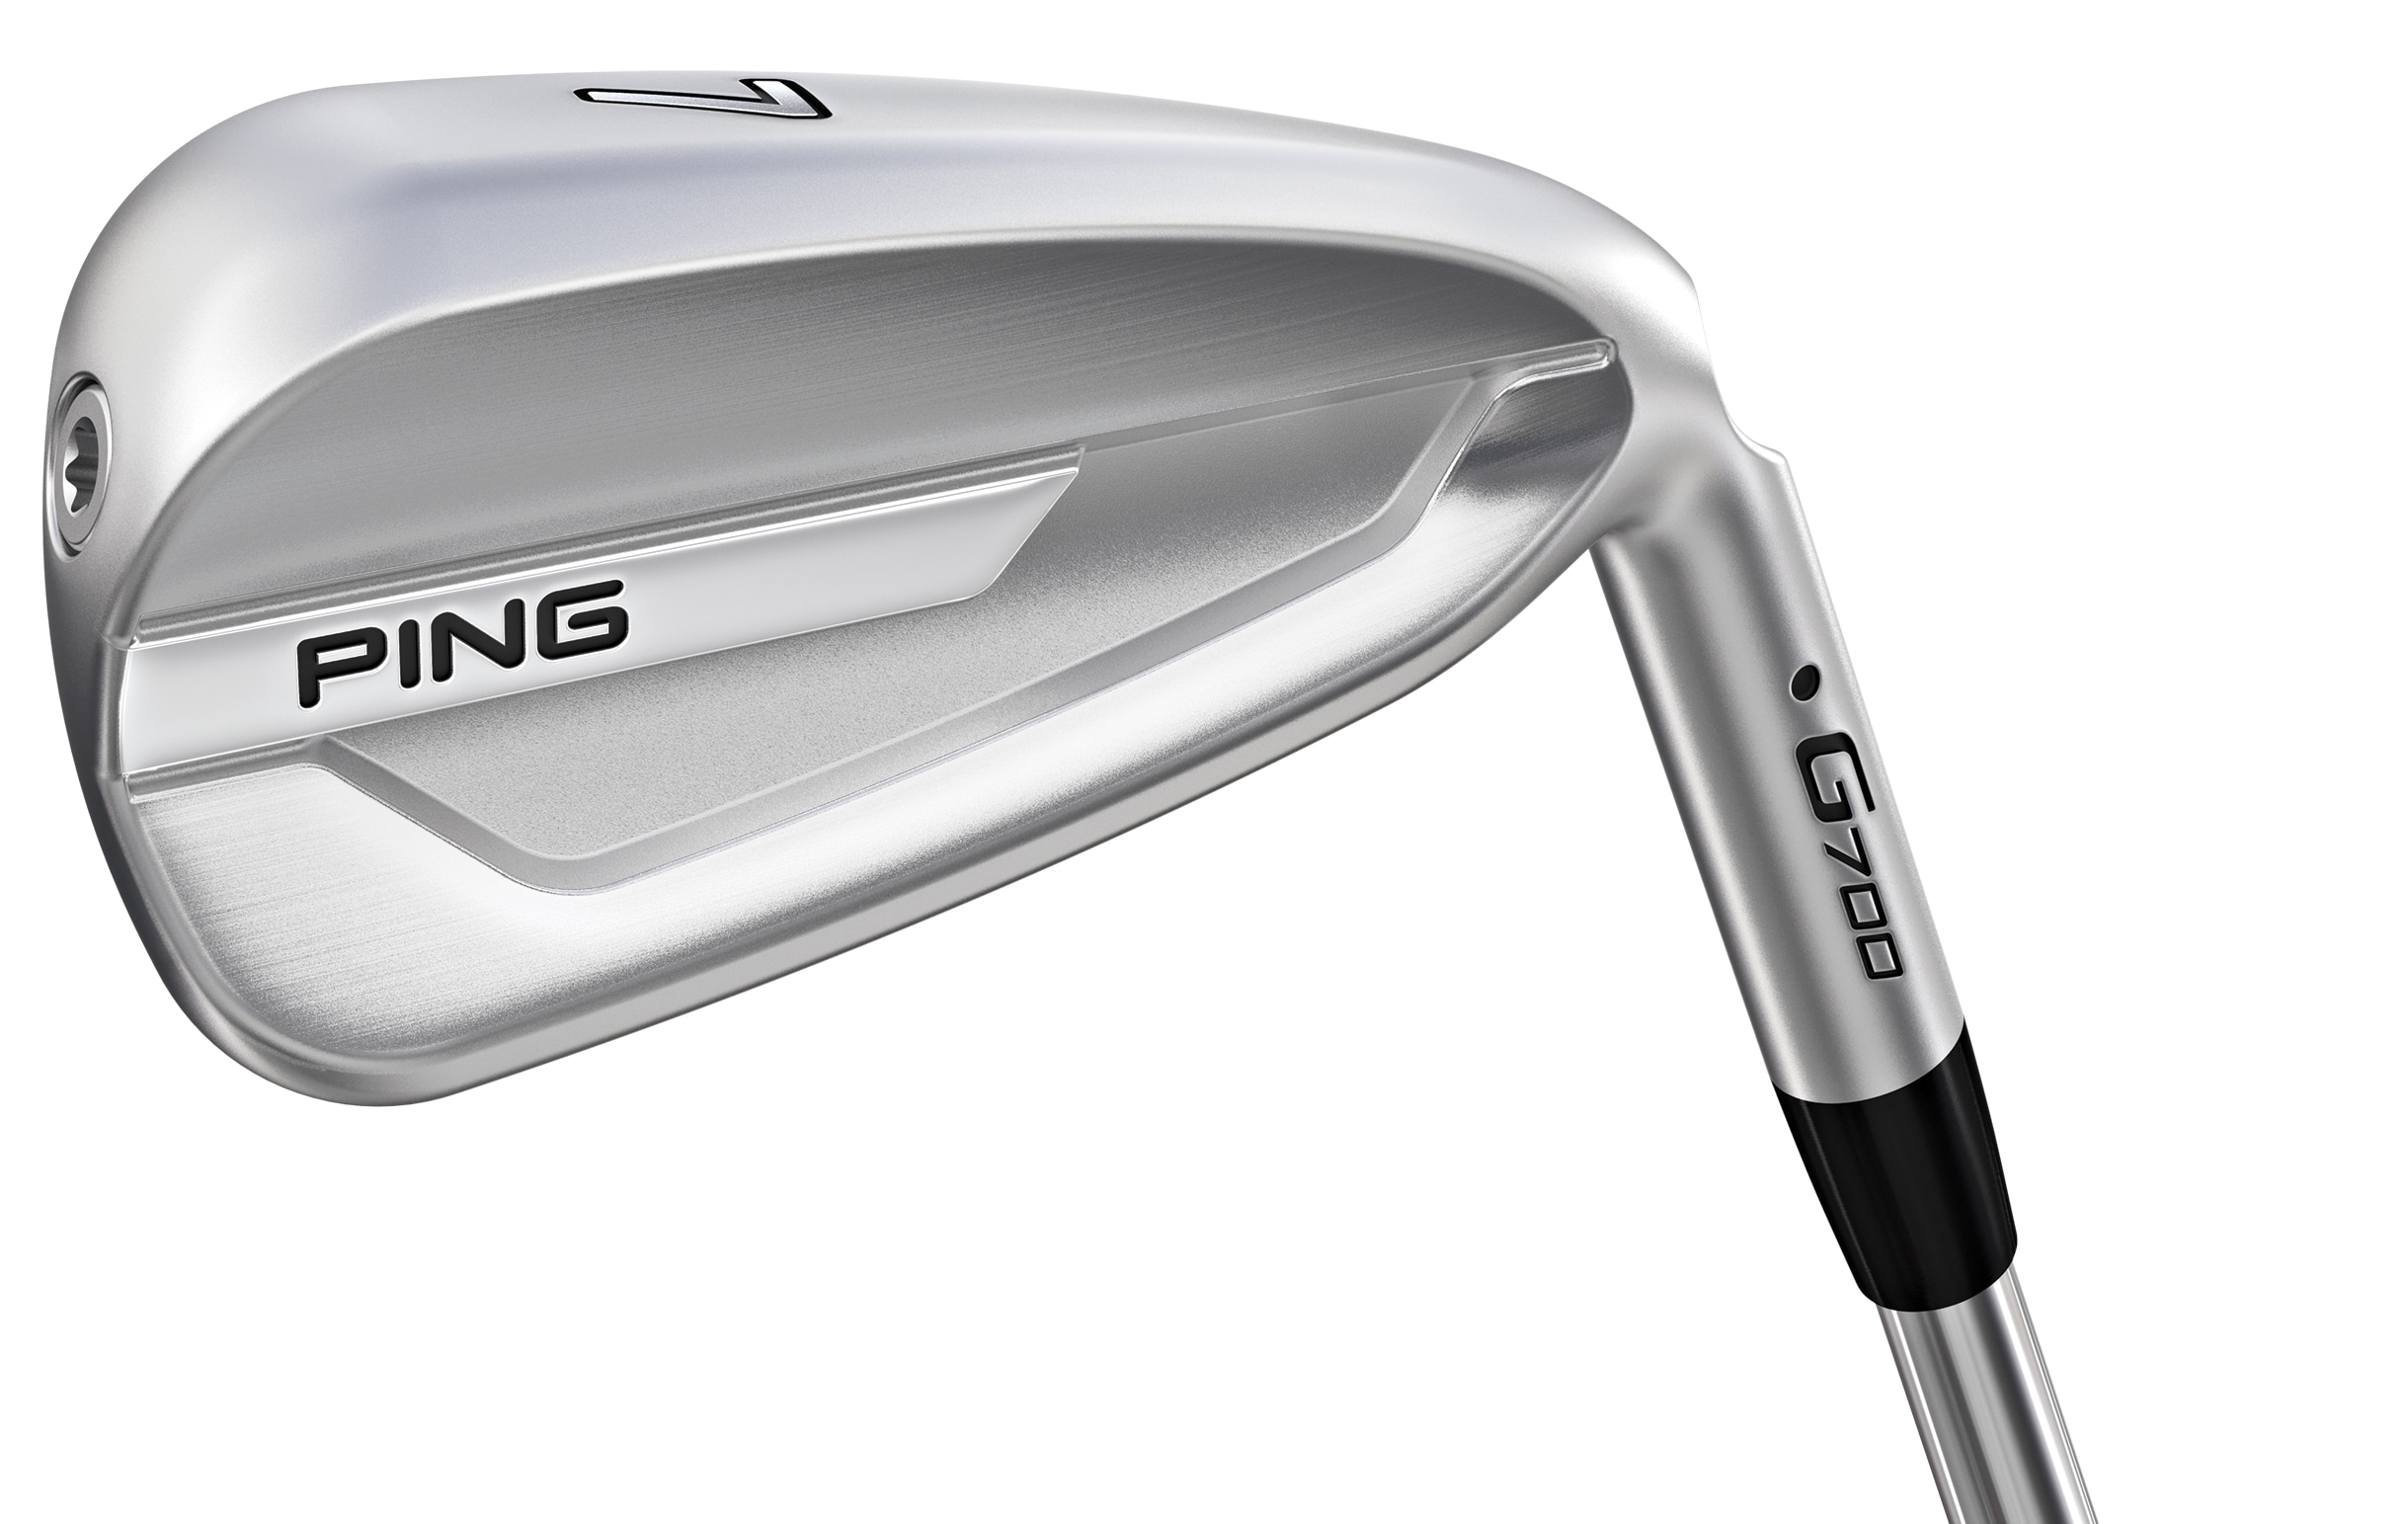 Irons - Ping PING G700 iron review. 